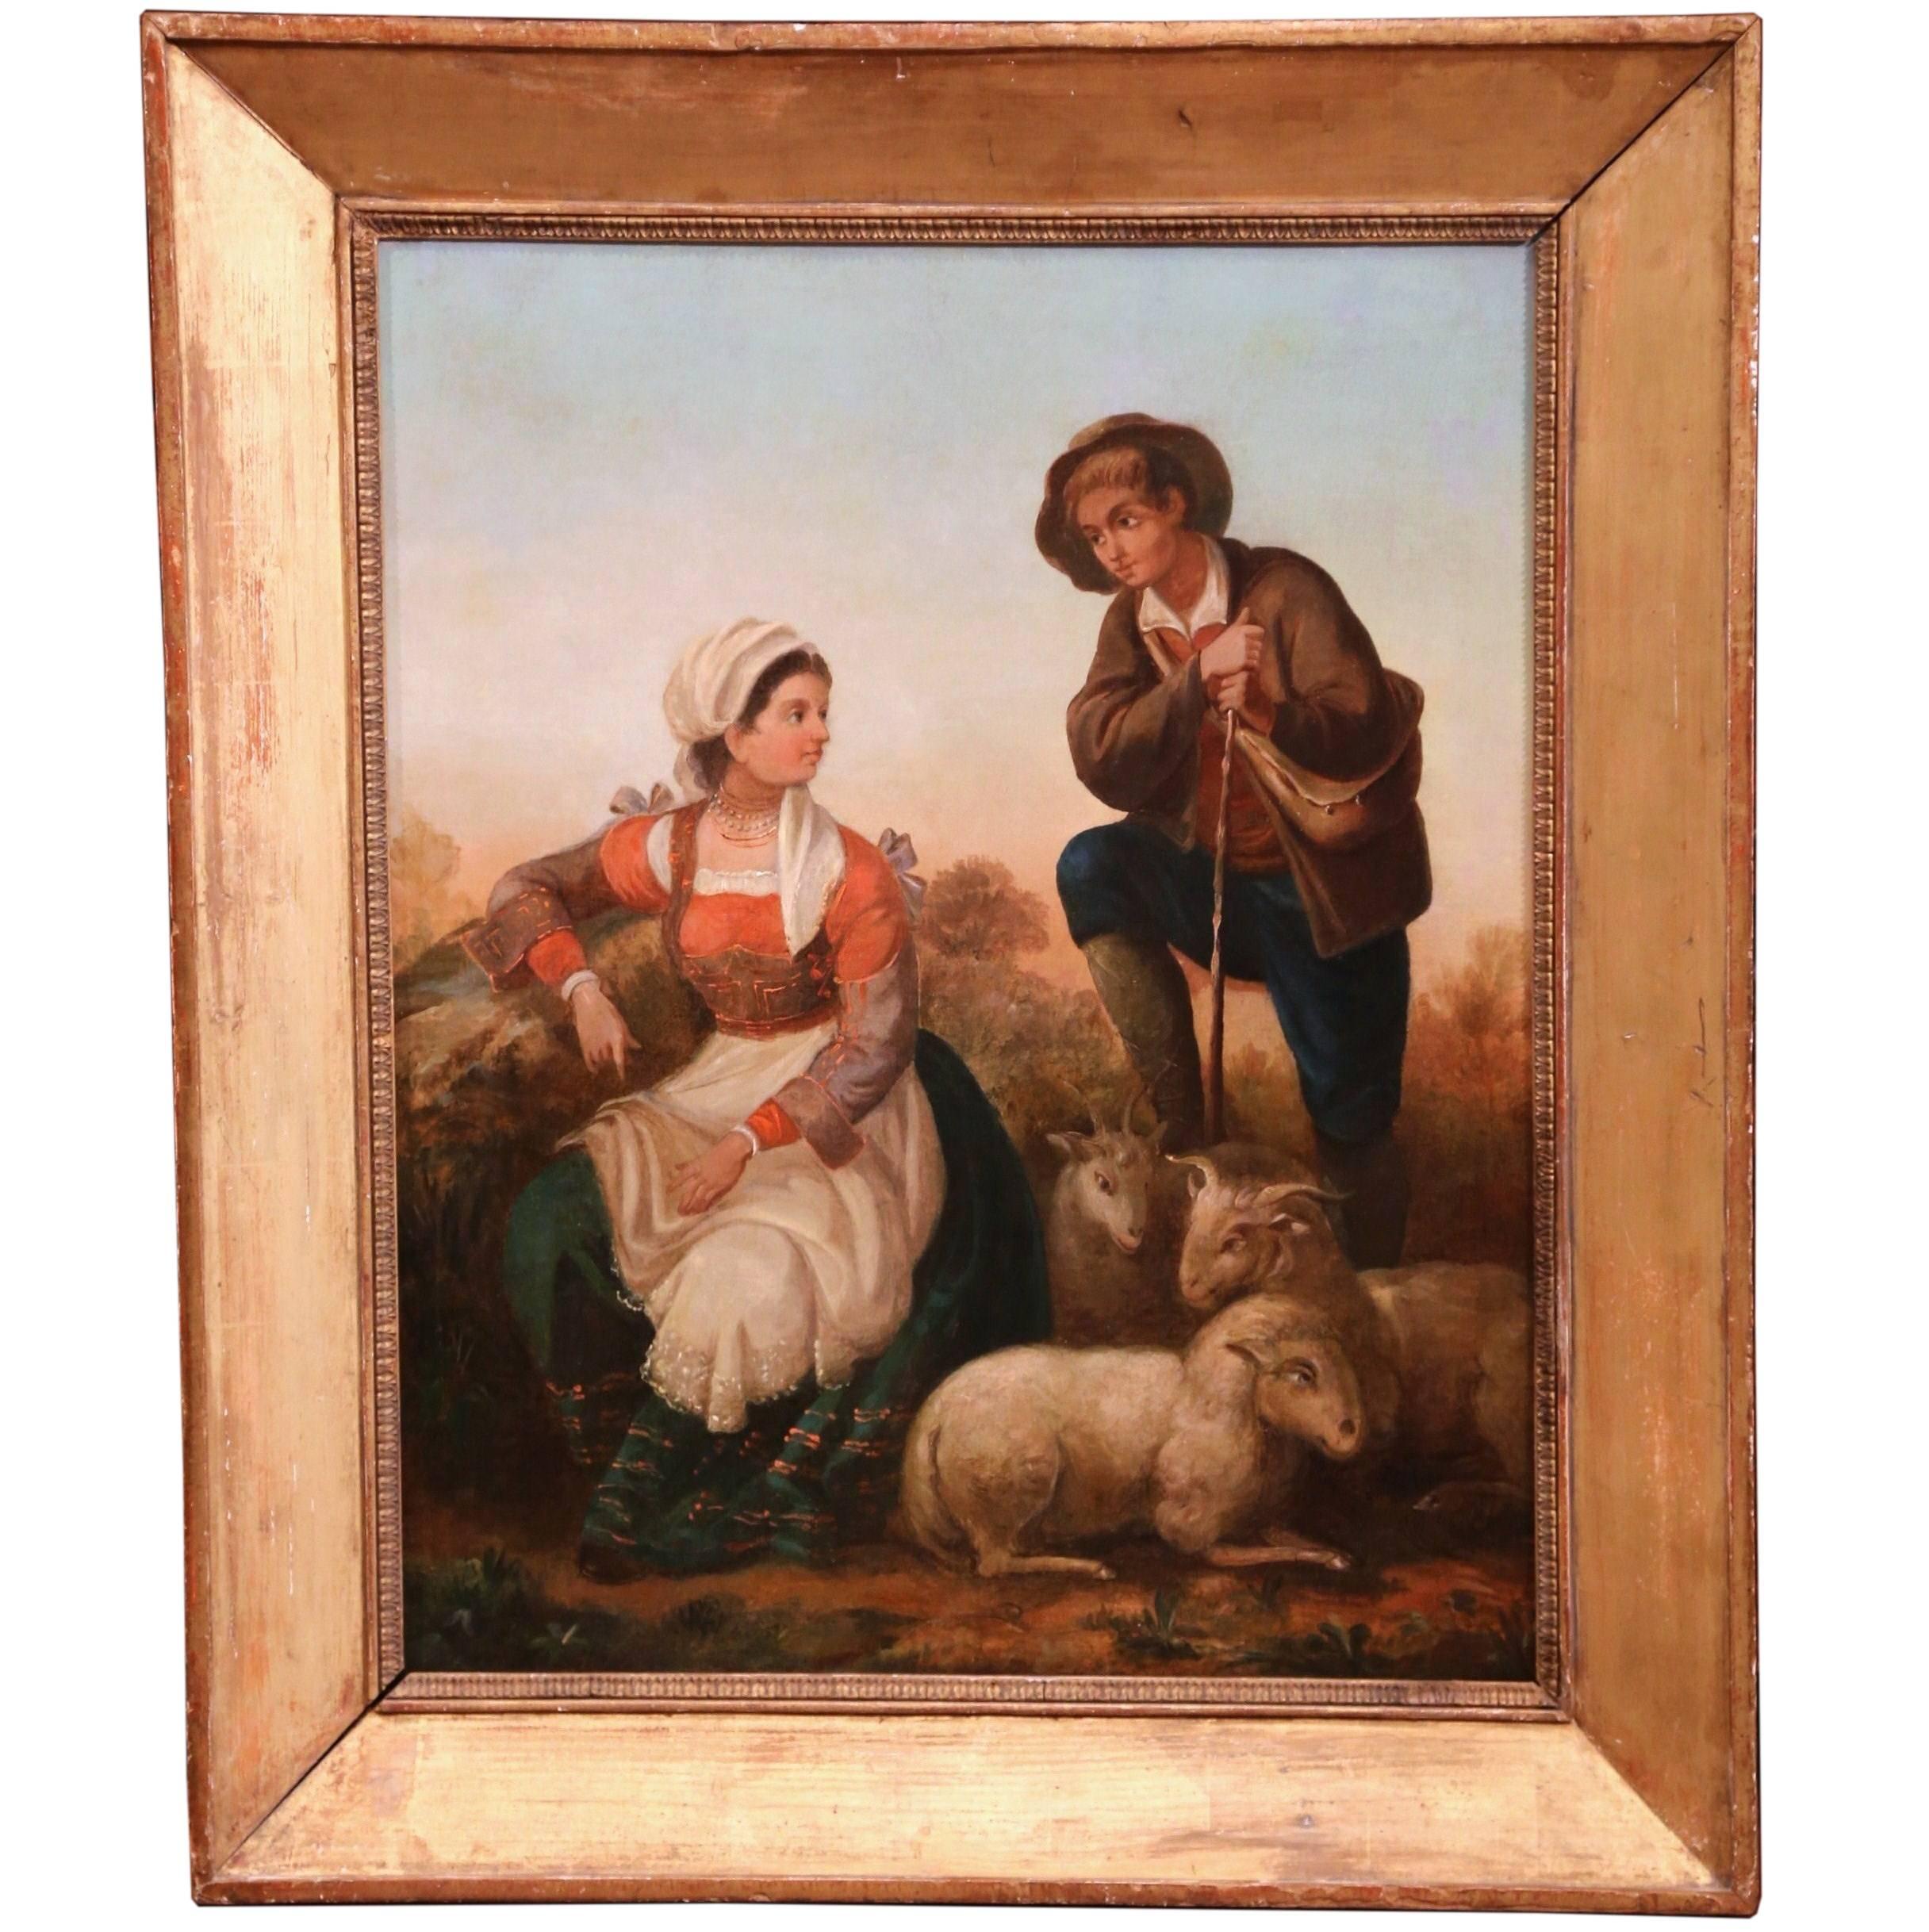 Unknown Figurative Painting - Large 19th Century French Shepherds and Sheep Oil Painting in Gilt Frame